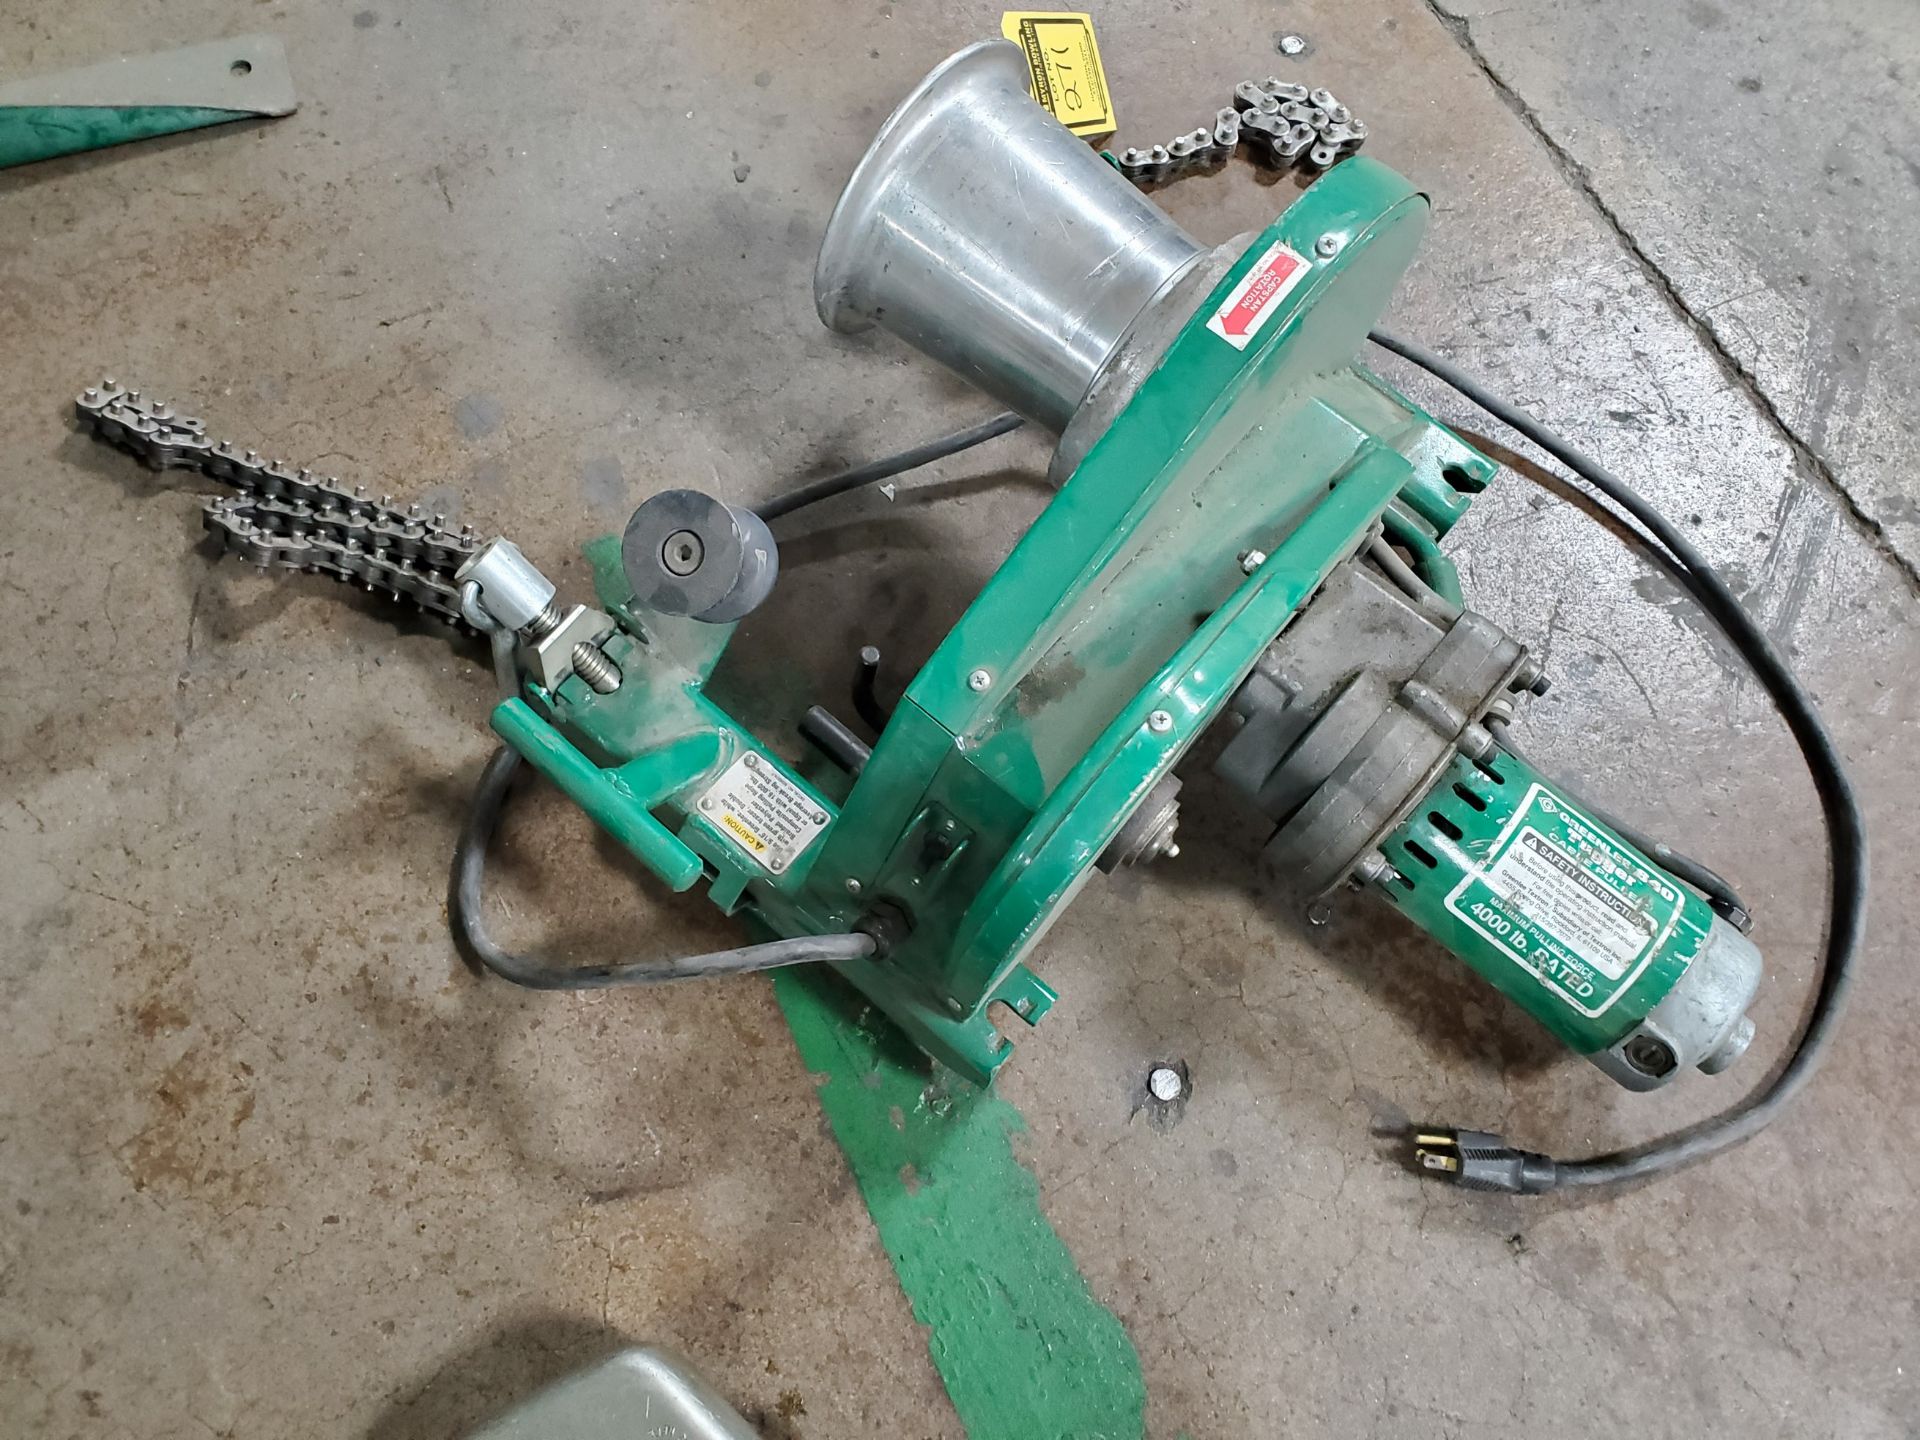 GREENLEE TUGGER CABLE PULLER, MODEL 640 WITH GREENLEE 446 CABLE PULLER BOX WITH 442 PORTA-PULLER - Image 5 of 6